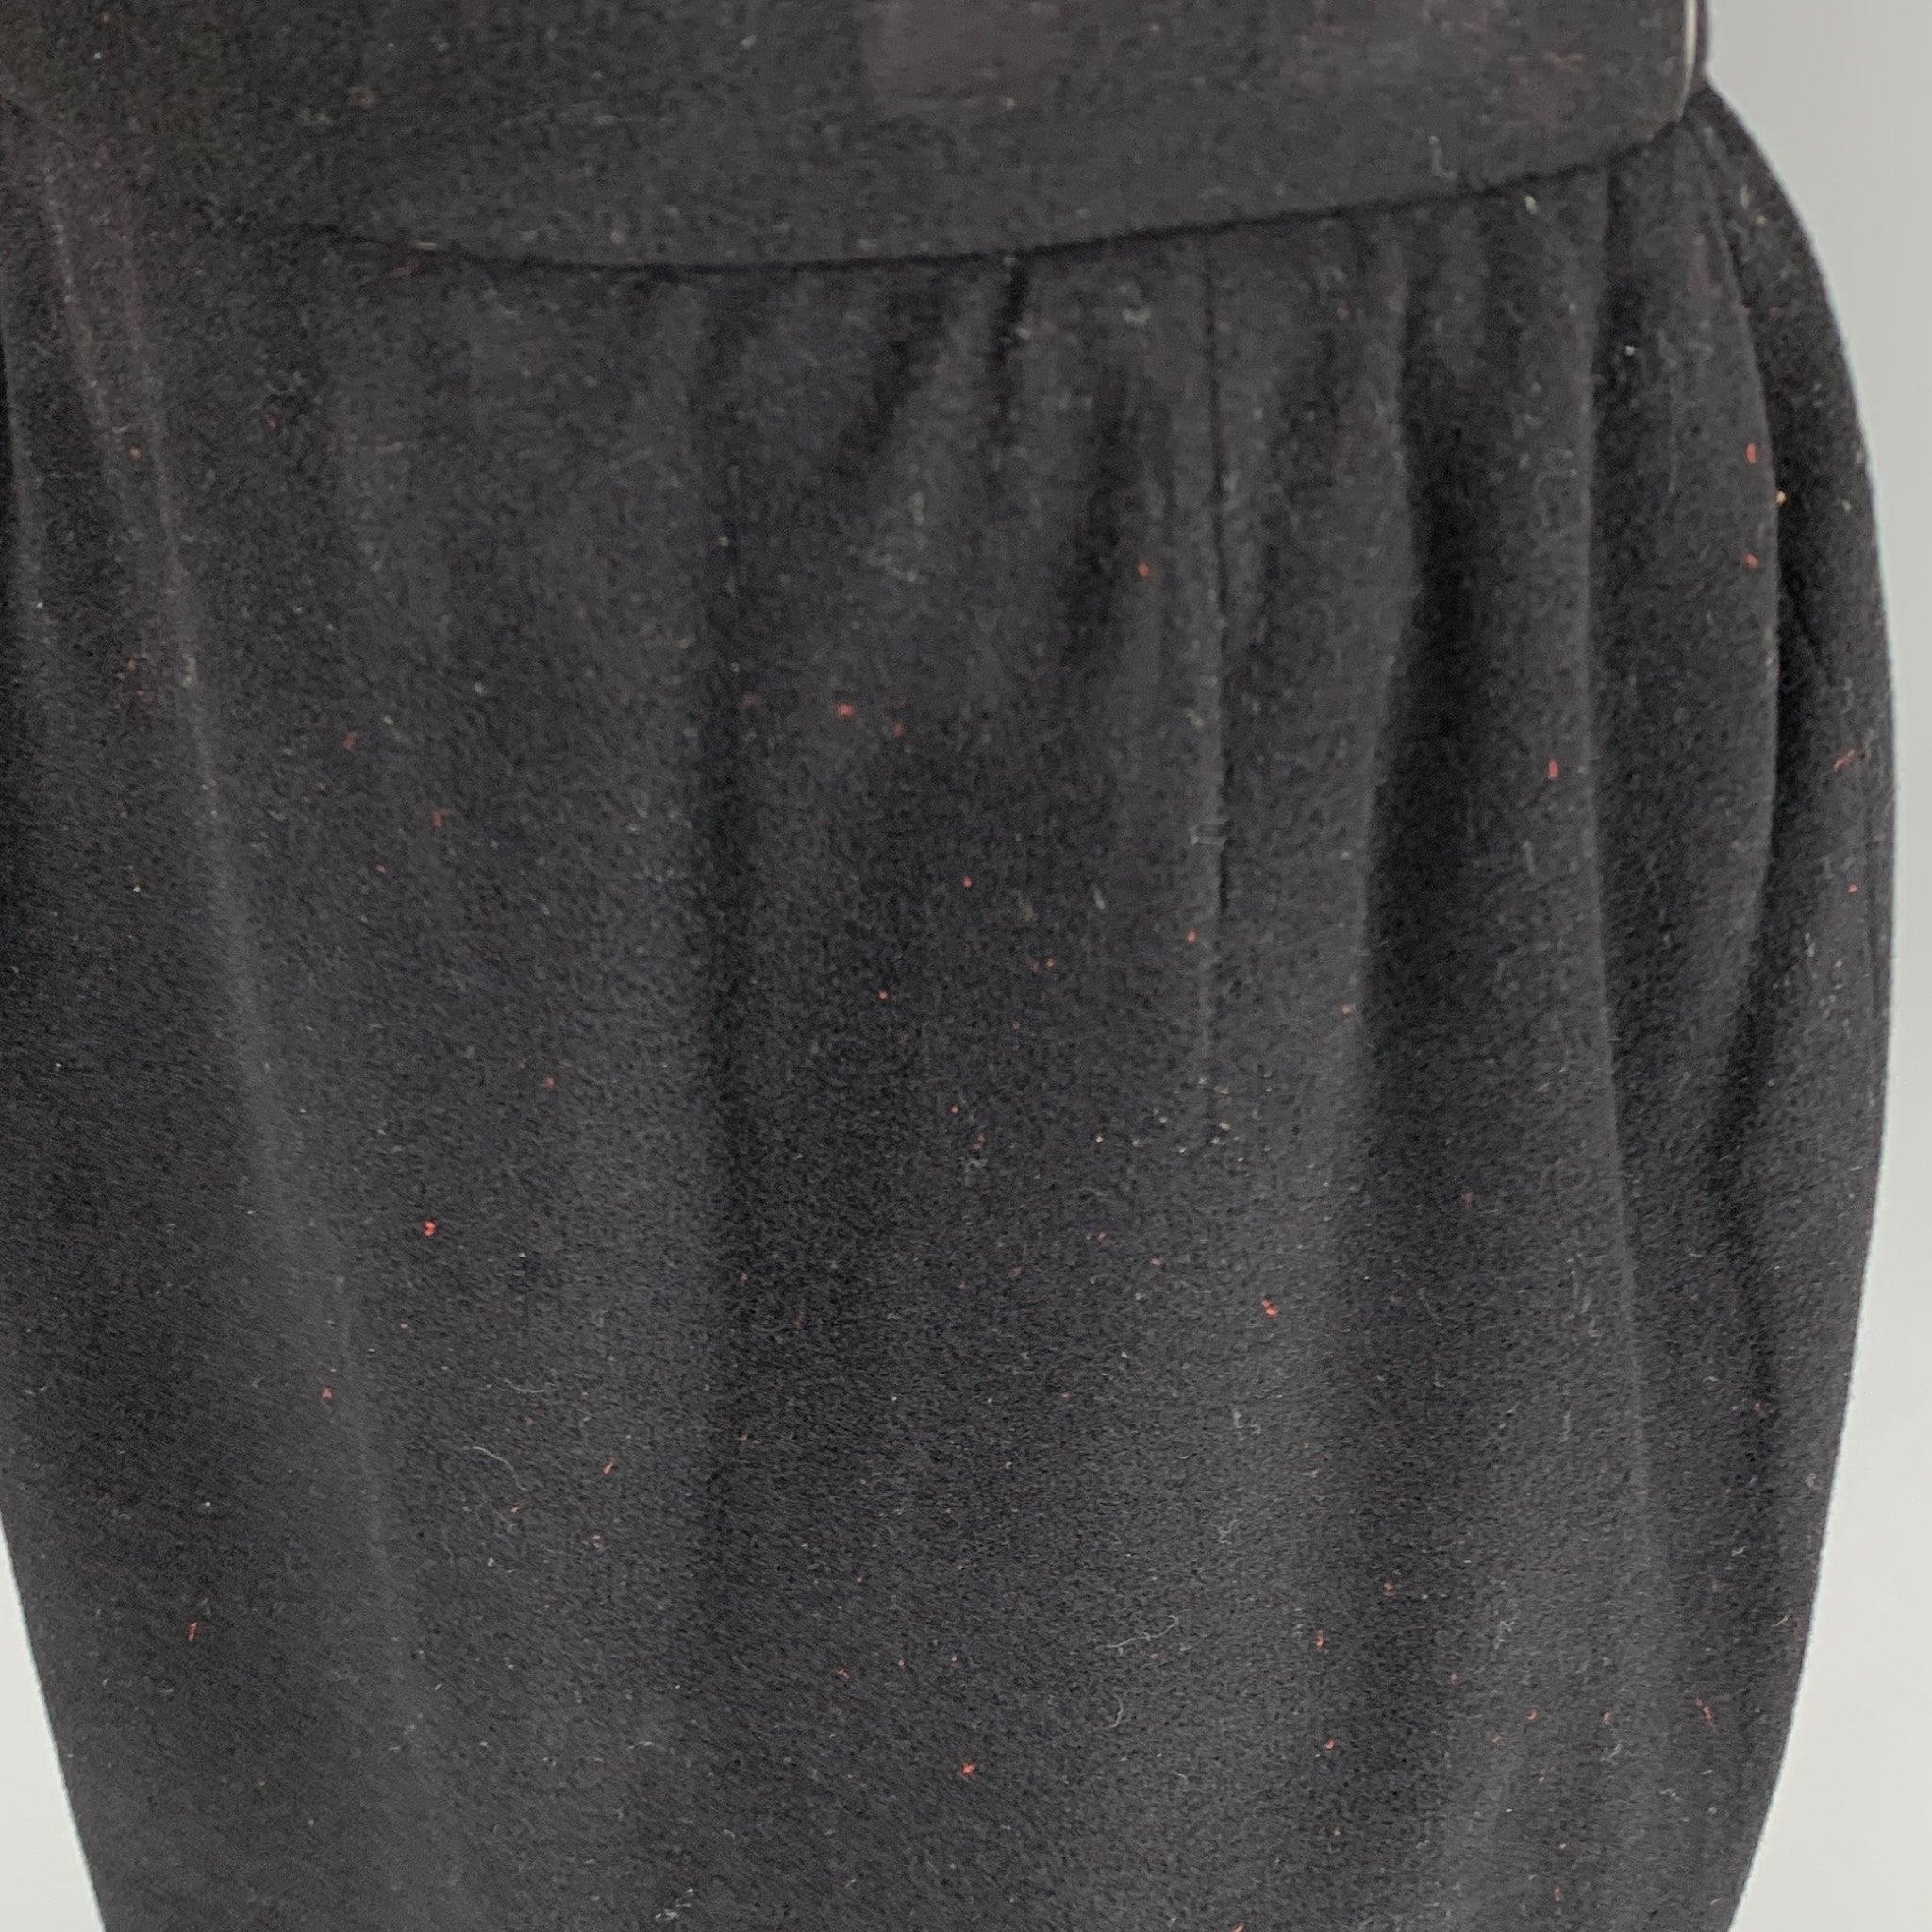 DONNA KARAN Size 4 Black Wool Cashmere Pencil Skirt In Good Condition For Sale In San Francisco, CA